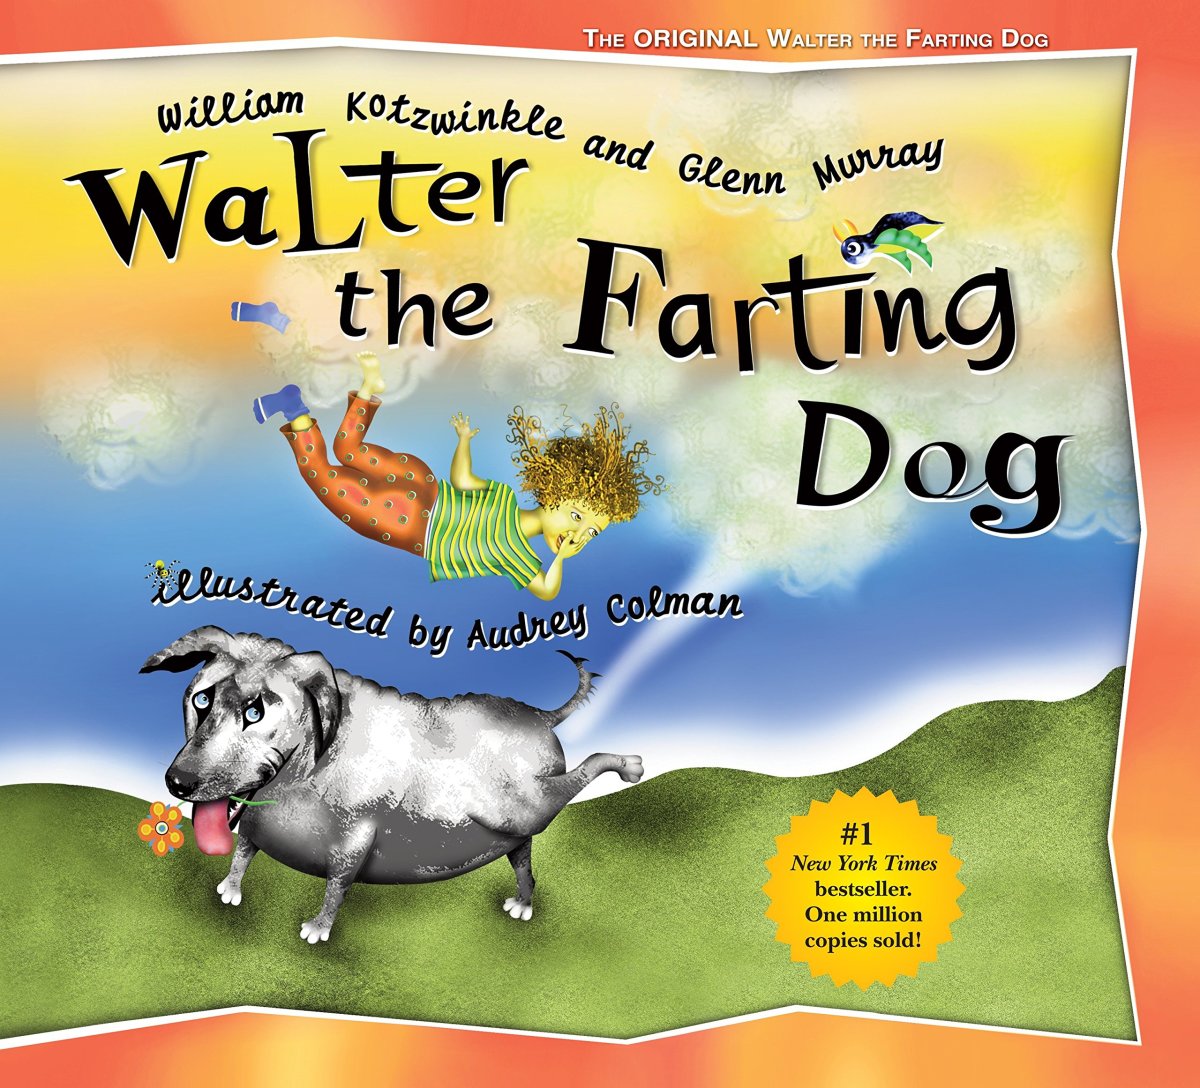 Walter the Farting Dog by William Kotzwinkle, Glenn Murray, and Audrey Colman